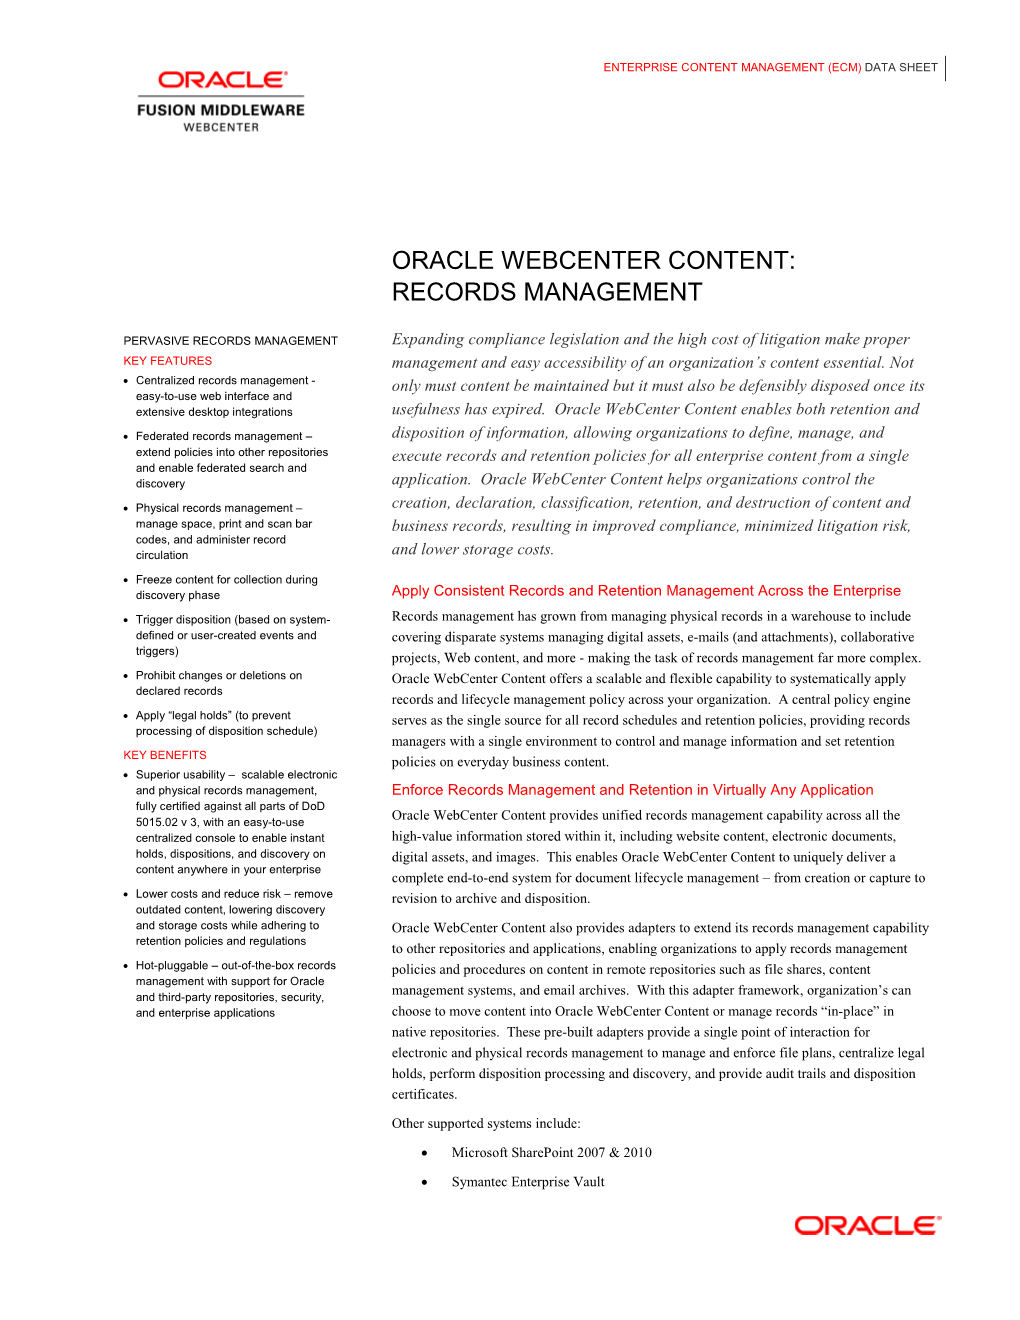 Oracle Webcenter Content Records Management Data Sheet